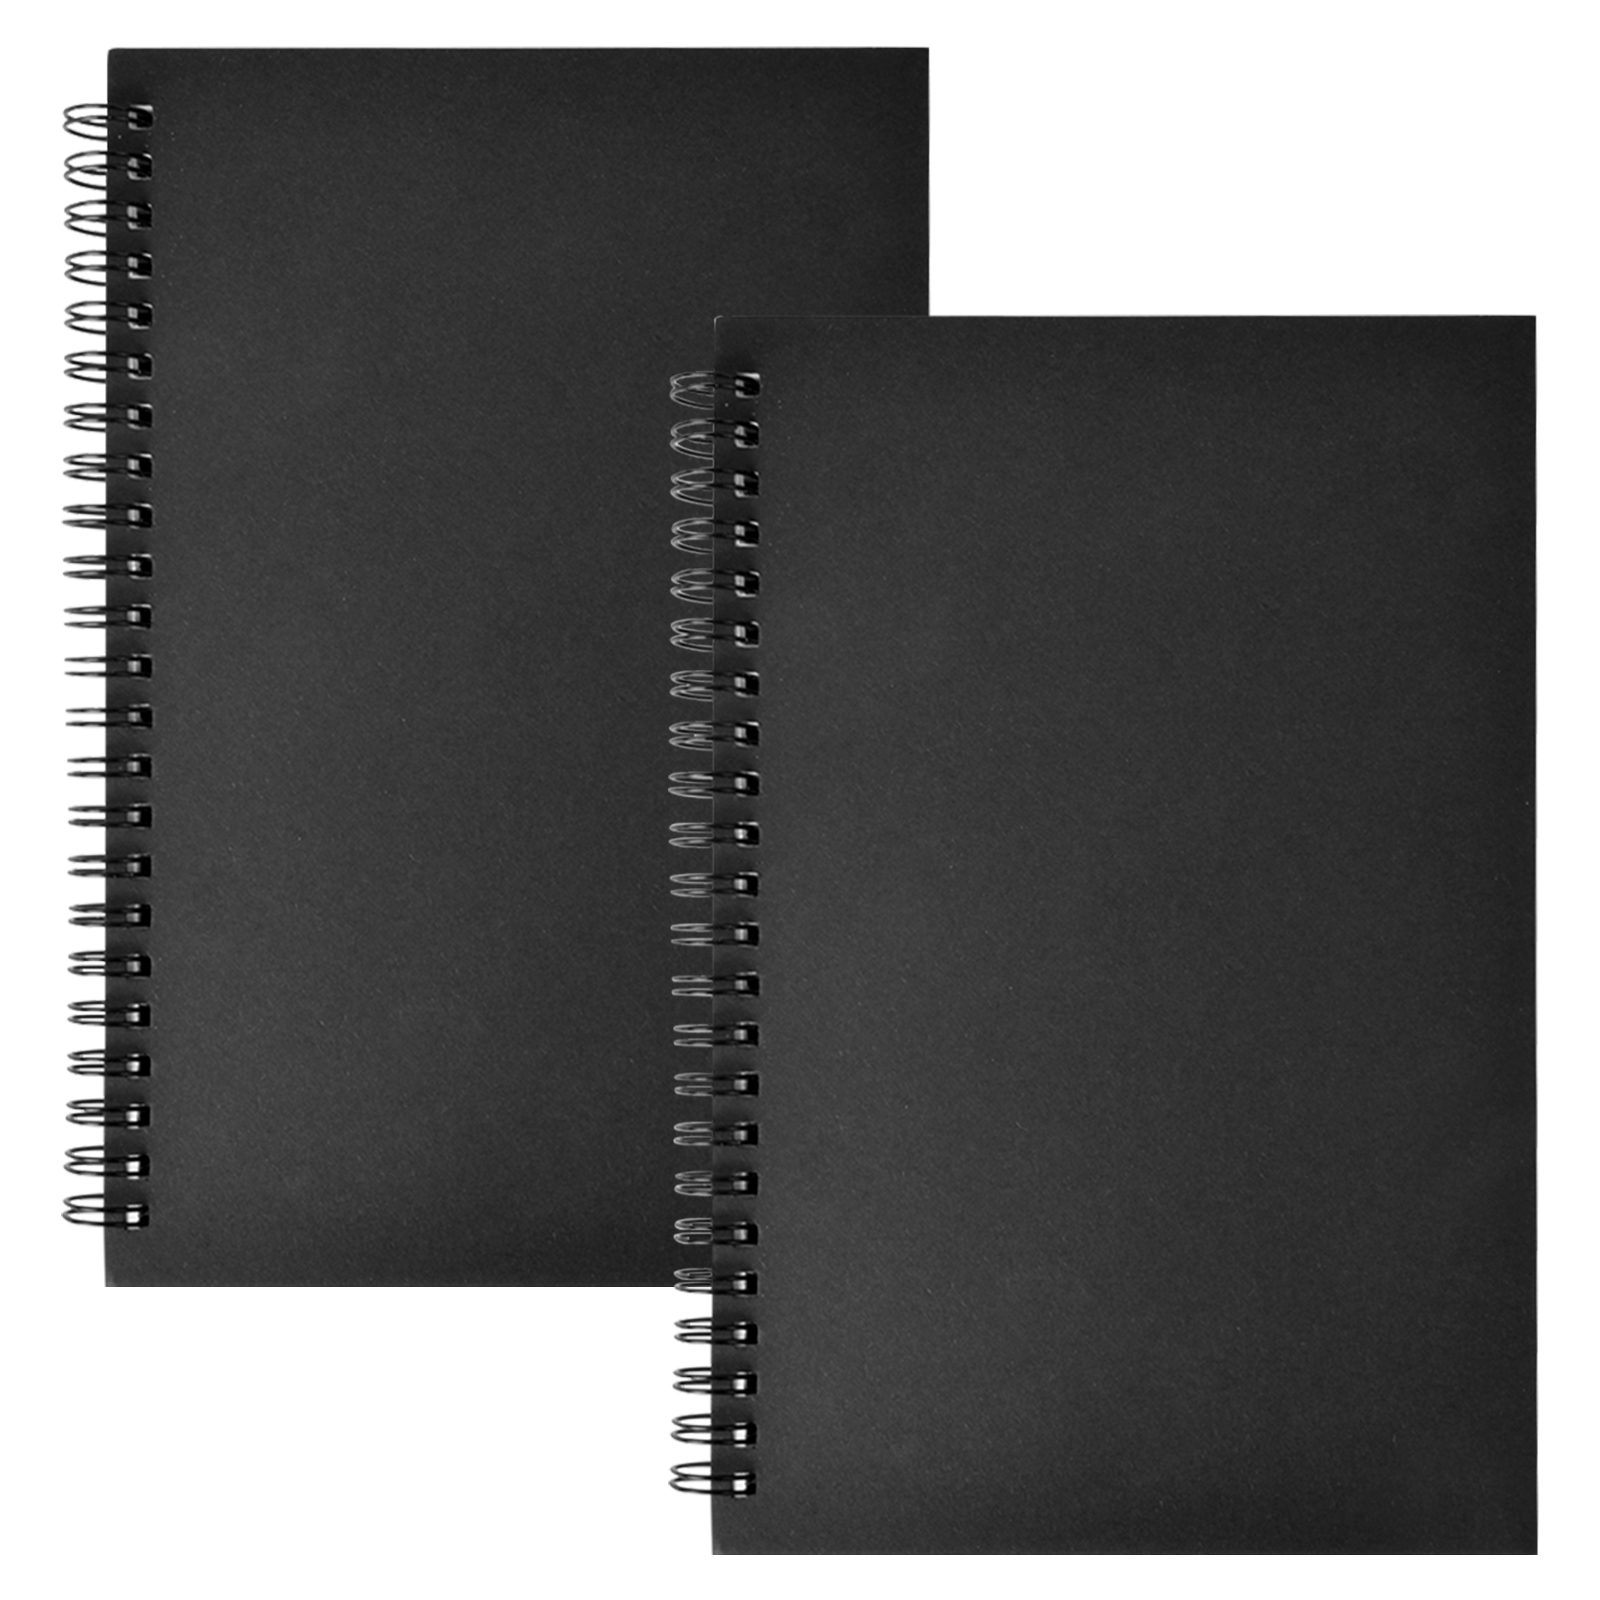  Emraw 9 x 12 Sketch Book Top Wire Bound Spiral, Acid Free  Sketchbook White Writing, Drawing & Sketching Sketch Pads for Kids Adults  Beginners Artists, 30 Sheets Per Sketch Pad, 2